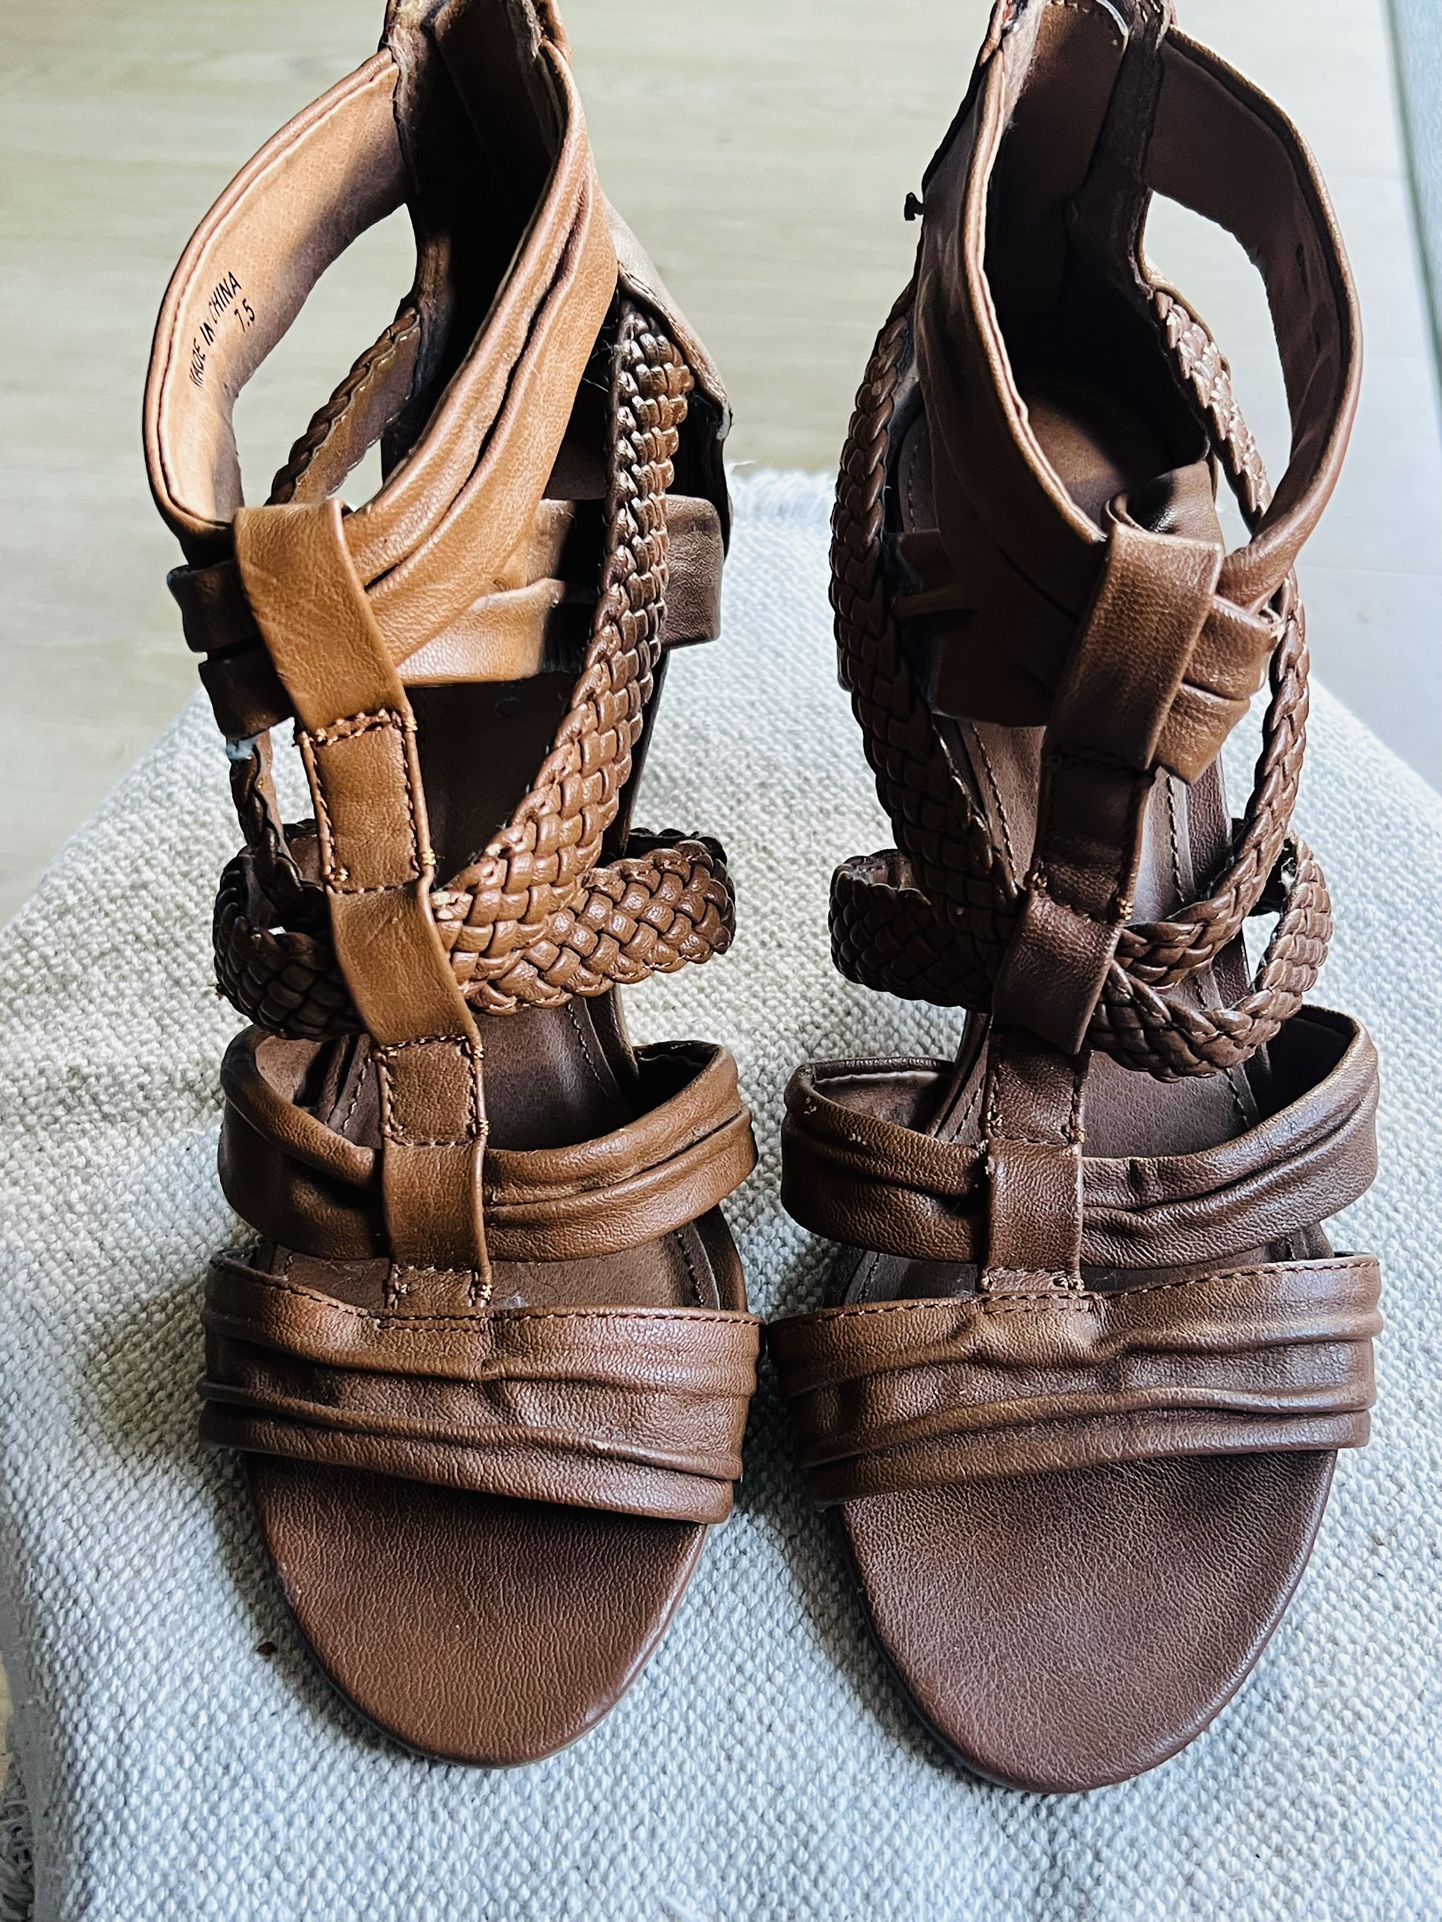 Cone Wedge Sandals Size 7.5